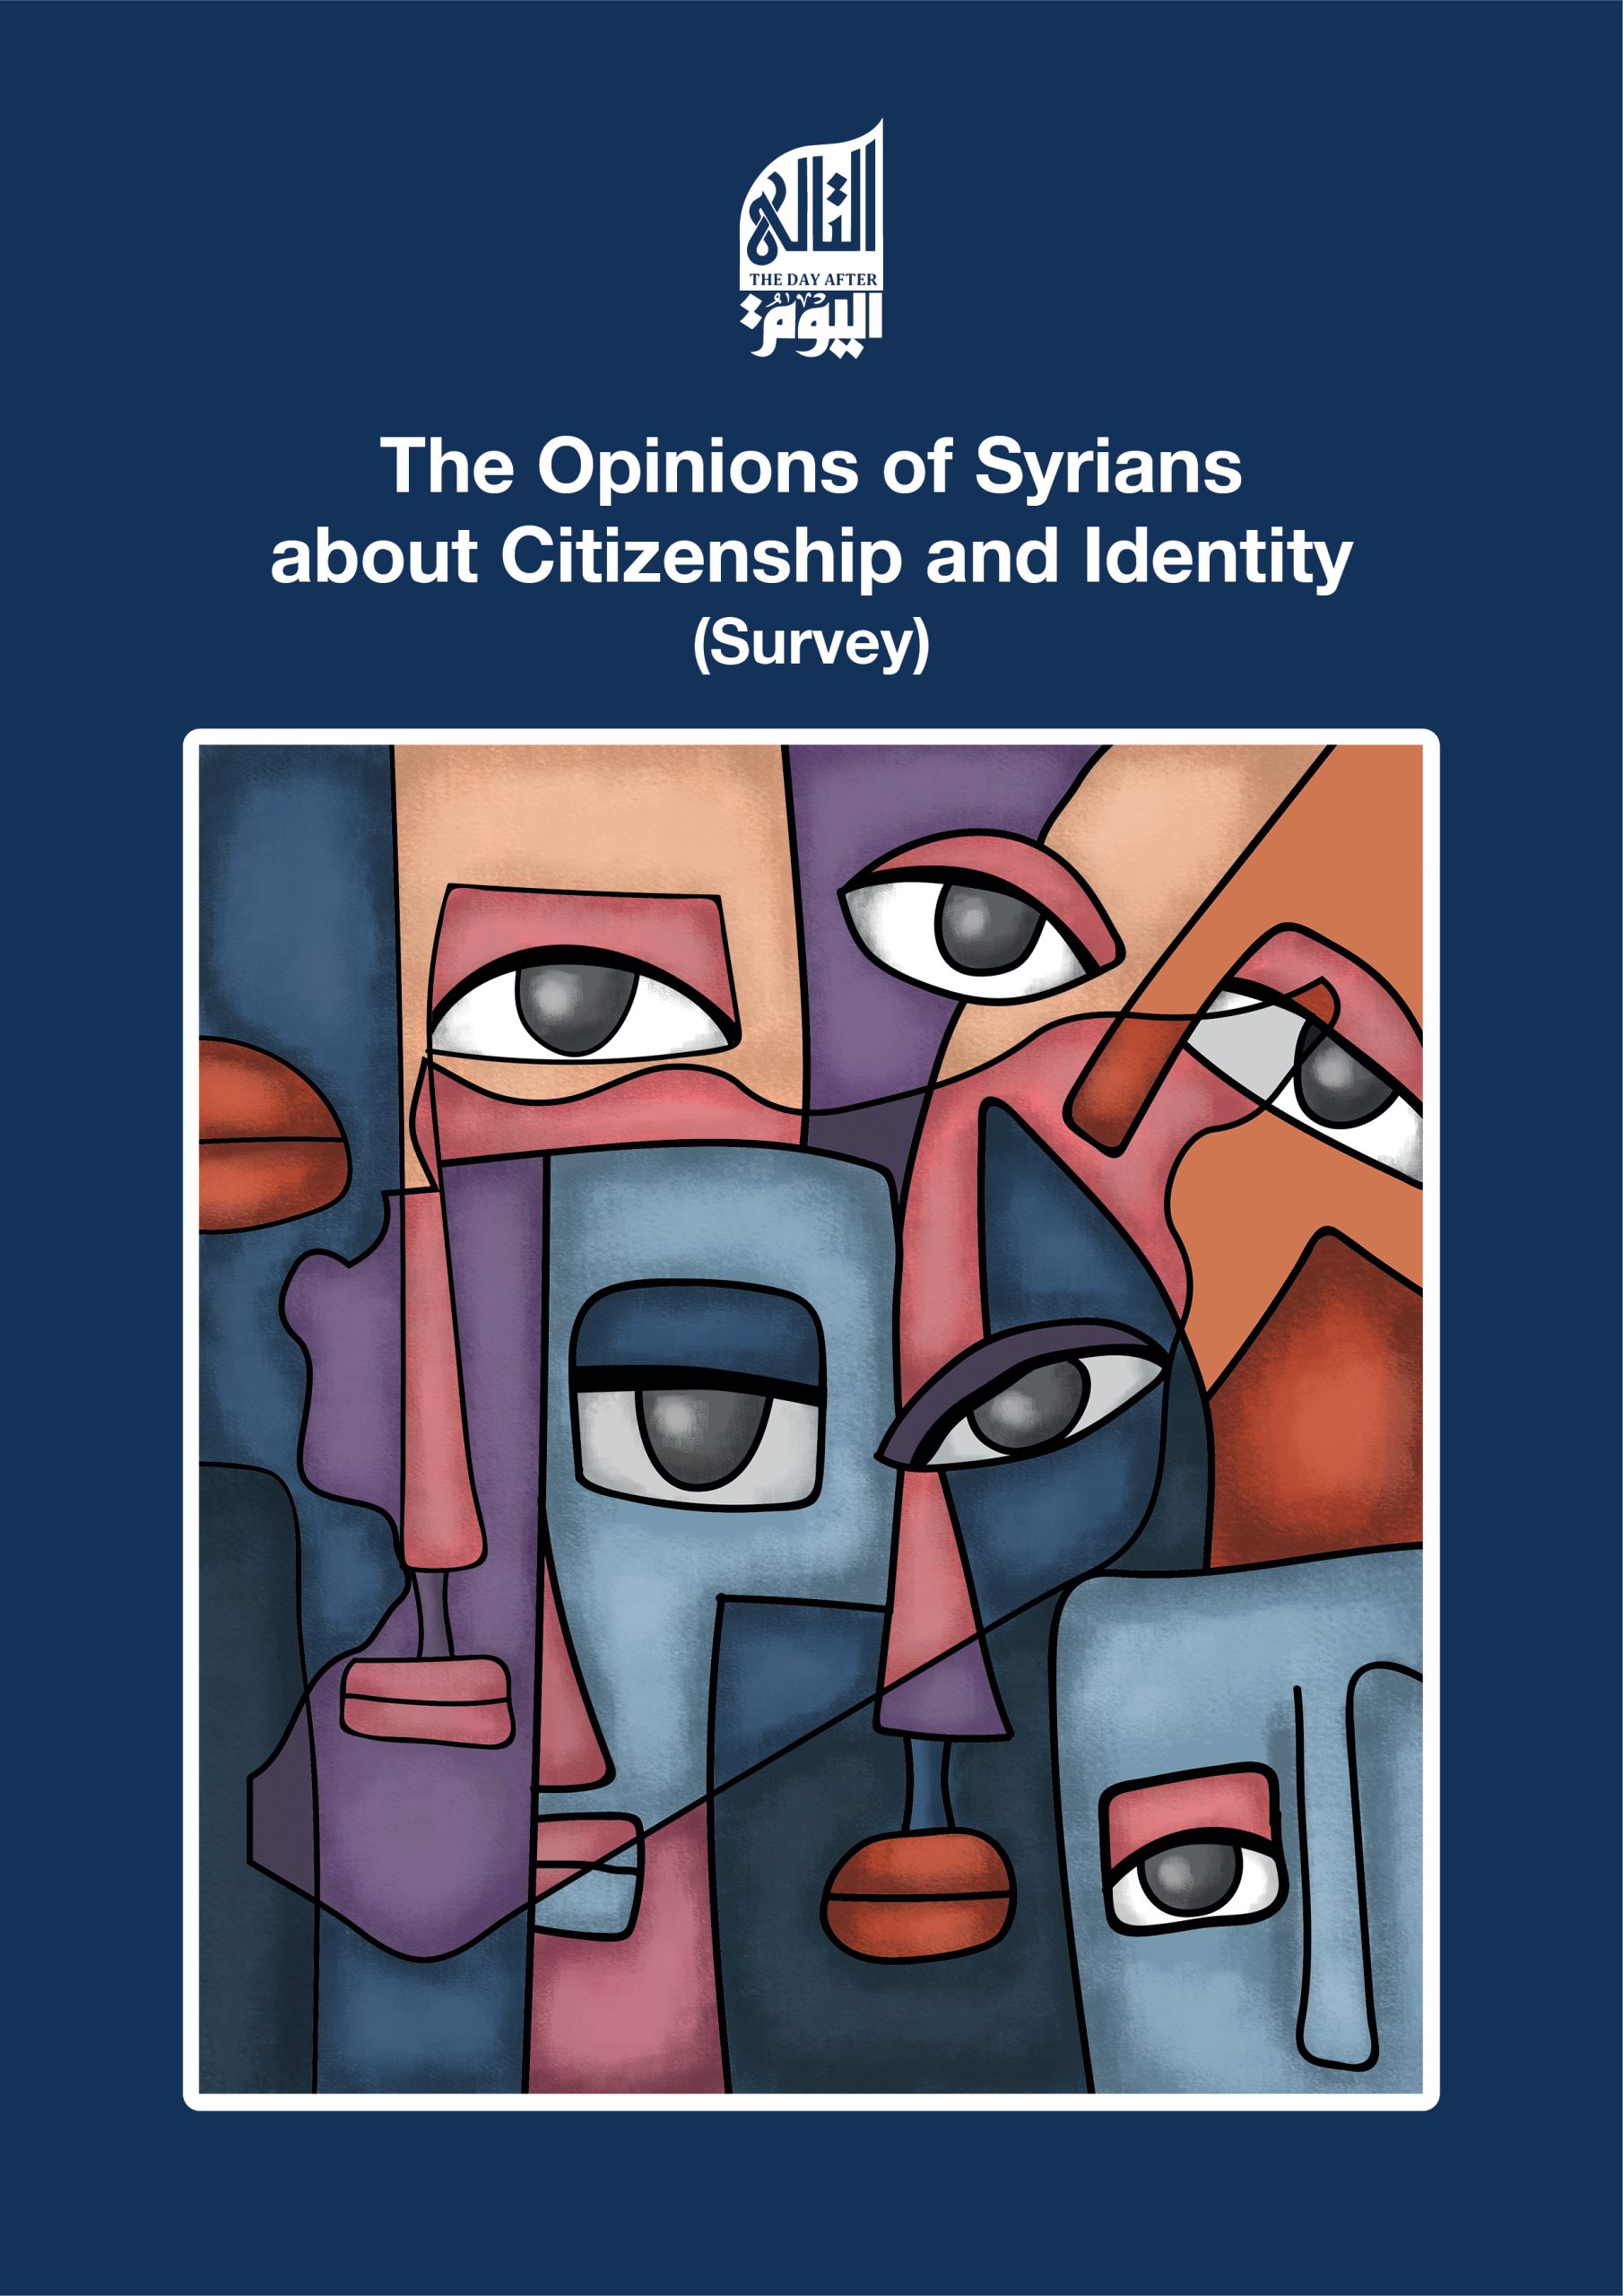 The Opinions of Syrians about Citizenship and Identity